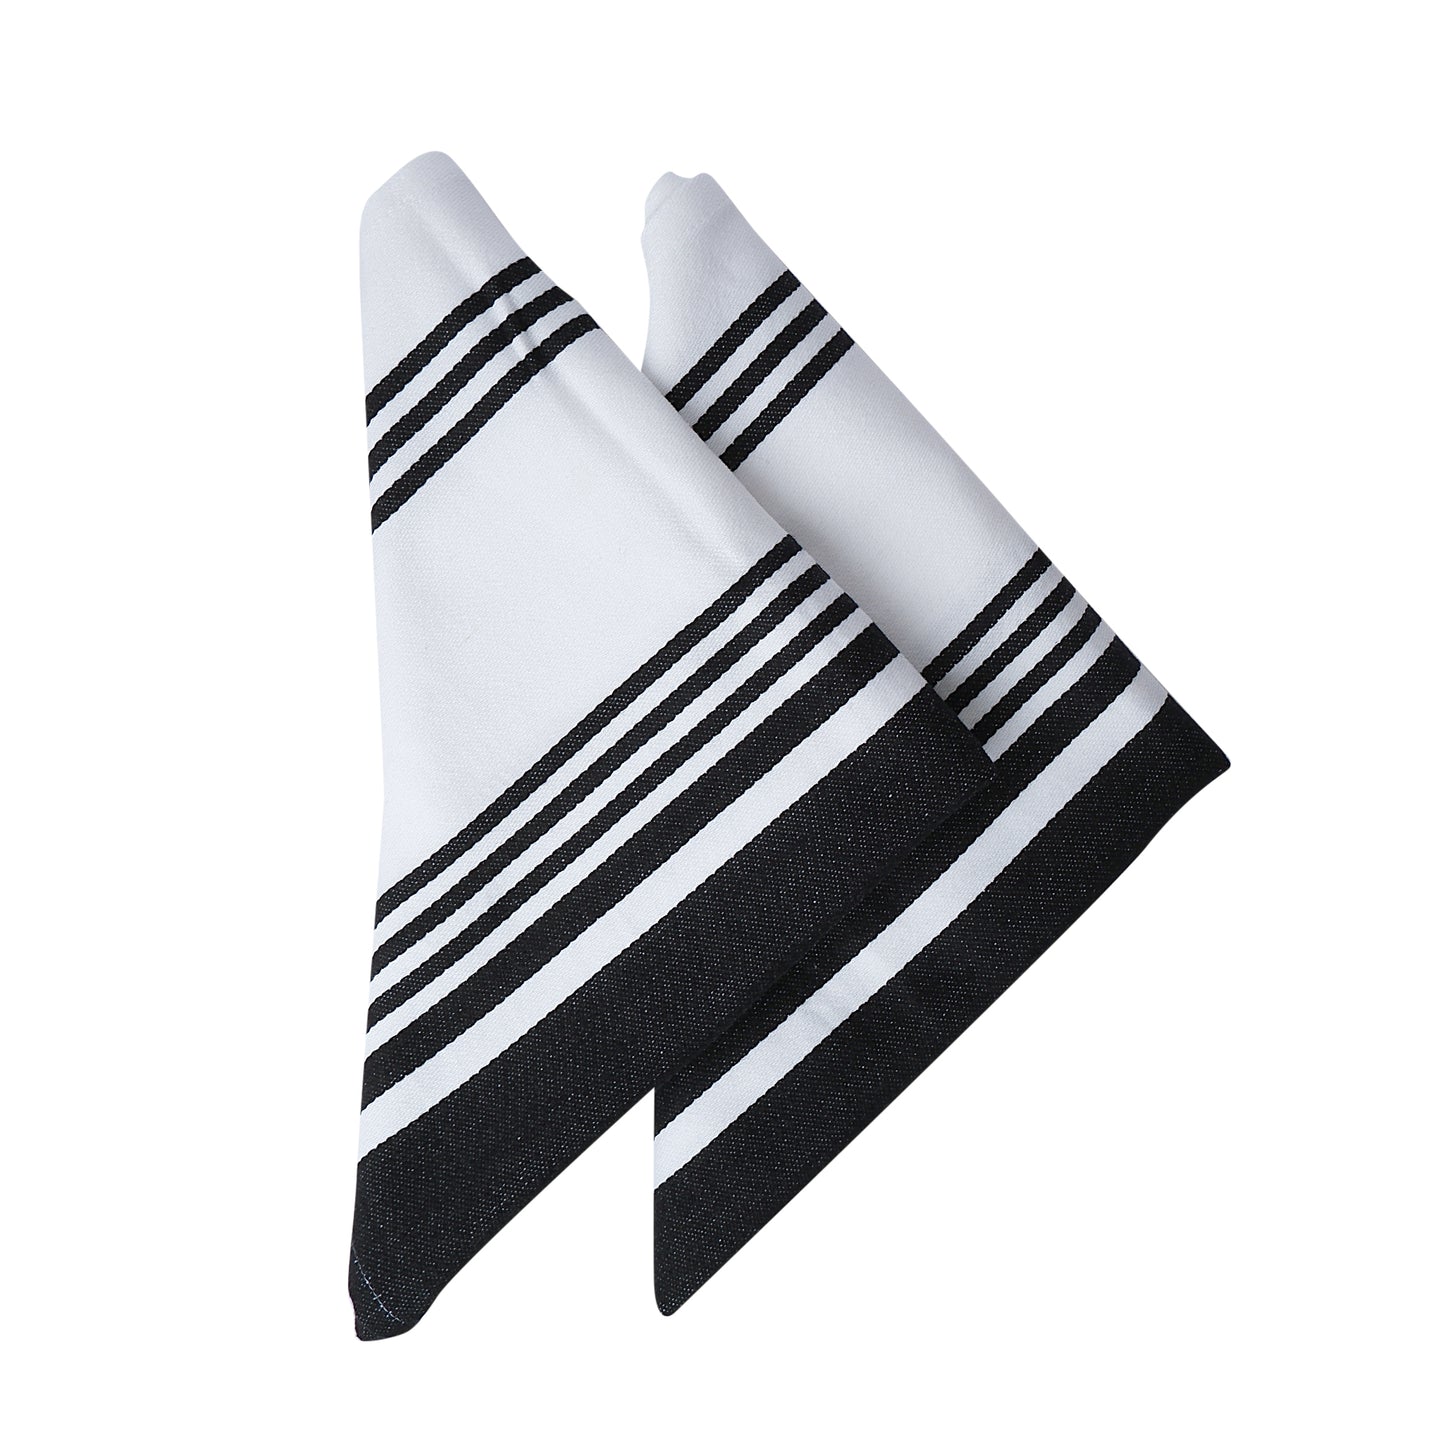 Set of 6 Striped 100% Cotton Dish Towels for Kitchen Tea Hand Towels 20x30 Inch Multi Color Options